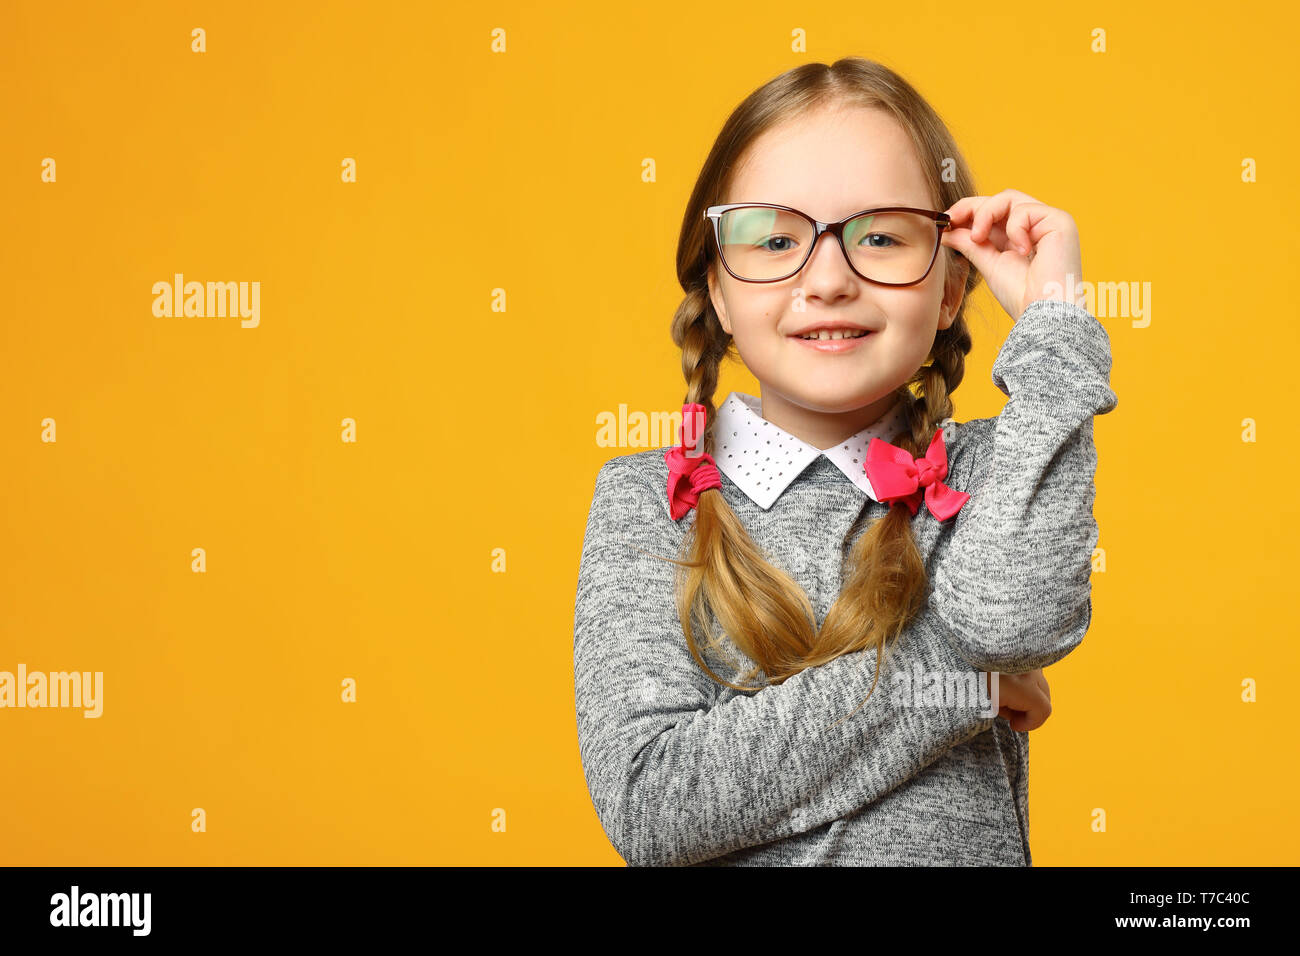 Portrait of a cute little kid girl in glasses on a yellow background. Child schoolgirl looking at the camera. The concept of education. Copy space. Stock Photo